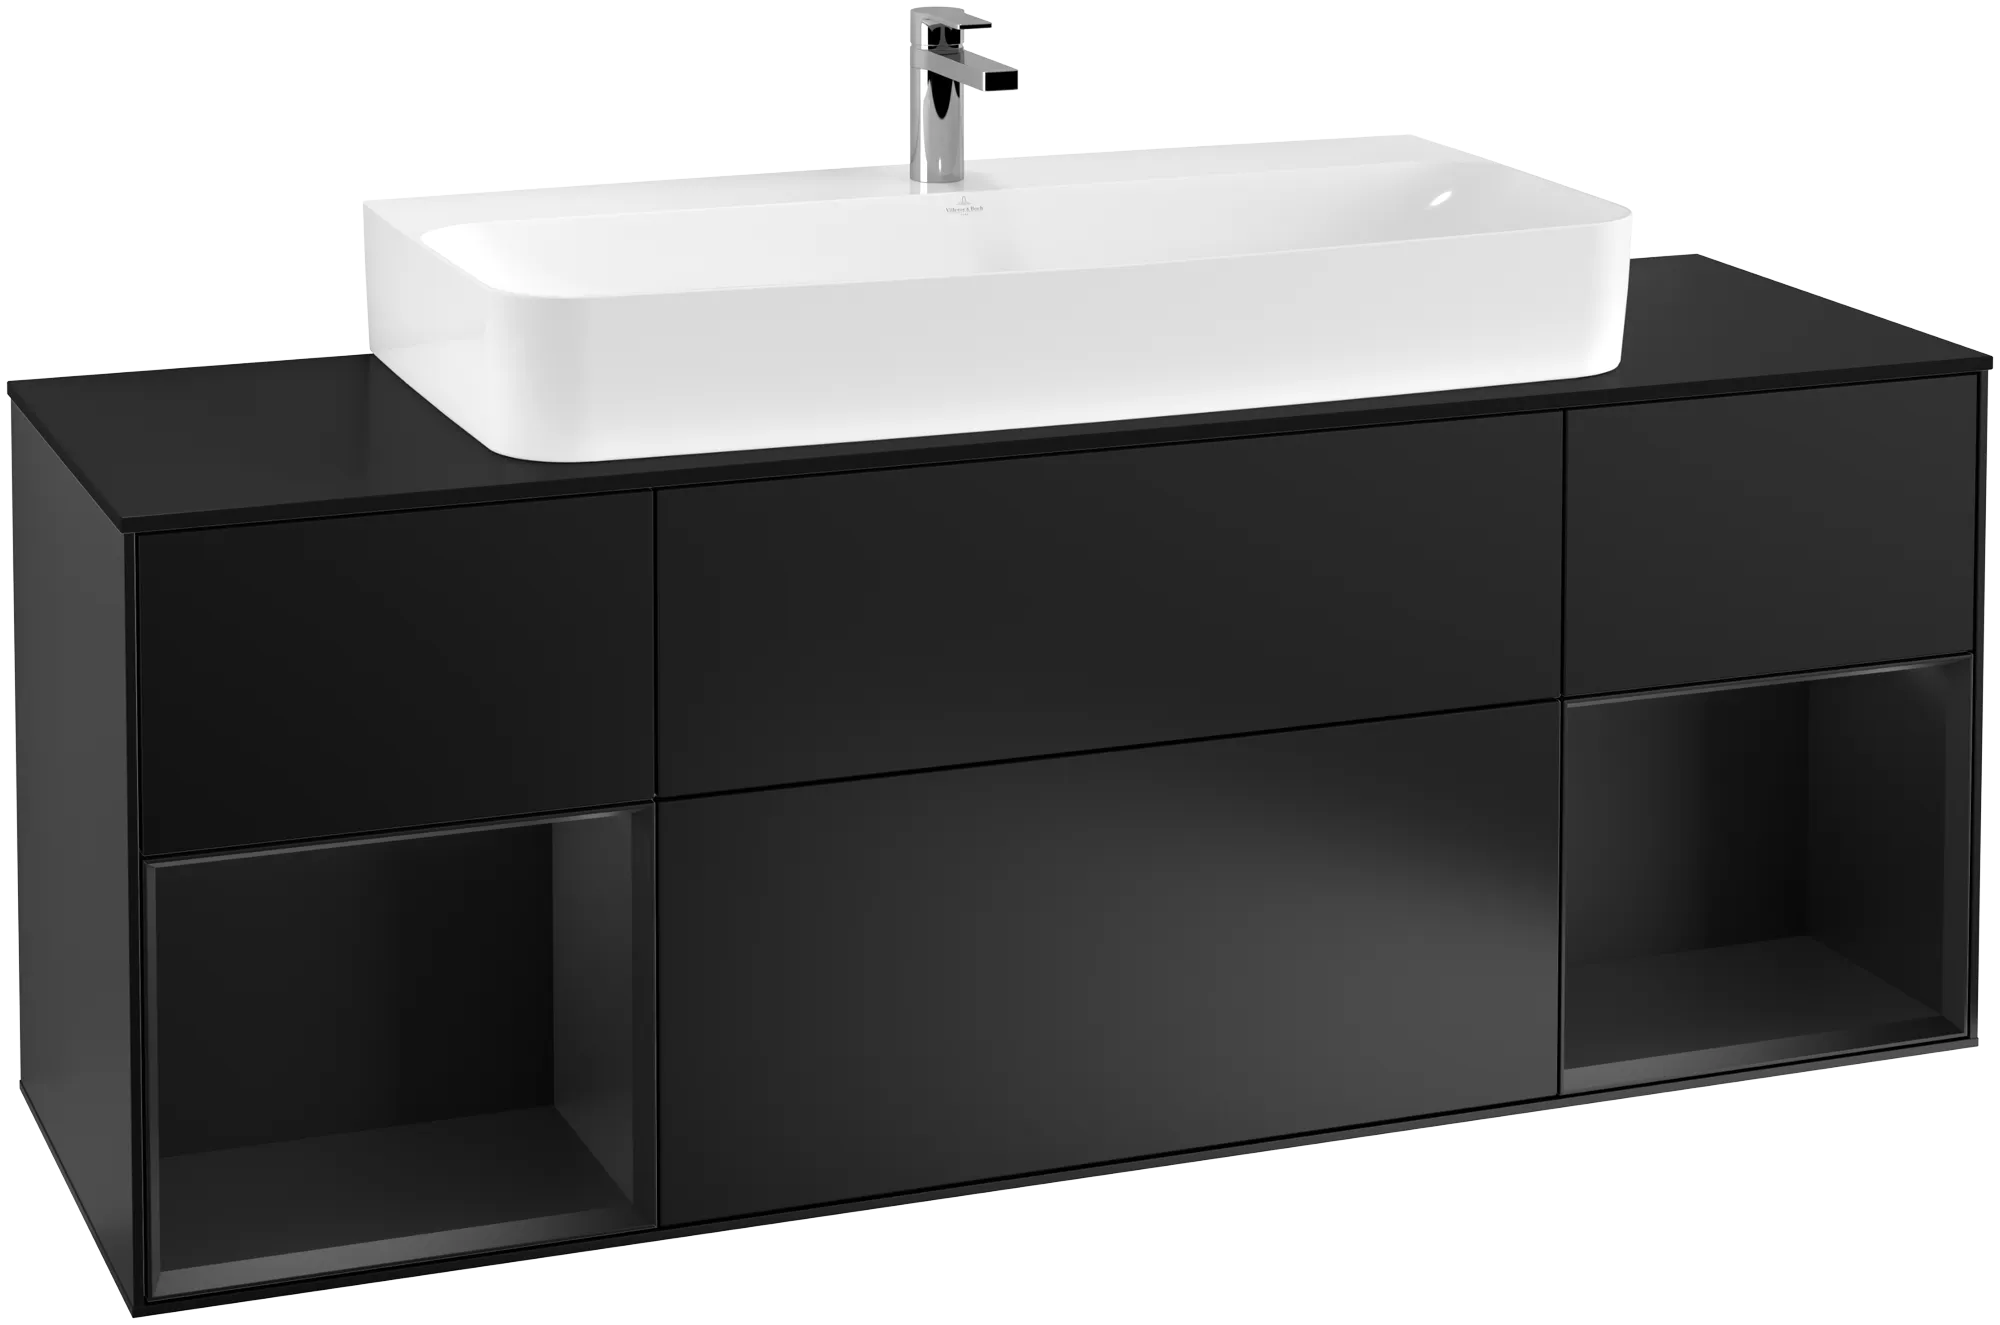 Obrázek VILLEROY BOCH Finion Vanity unit, with lighting, 4 pull-out compartments, 1600 x 603 x 501 mm, Black Matt Lacquer / Black Matt Lacquer / Glass Black Matt #G212PDPD